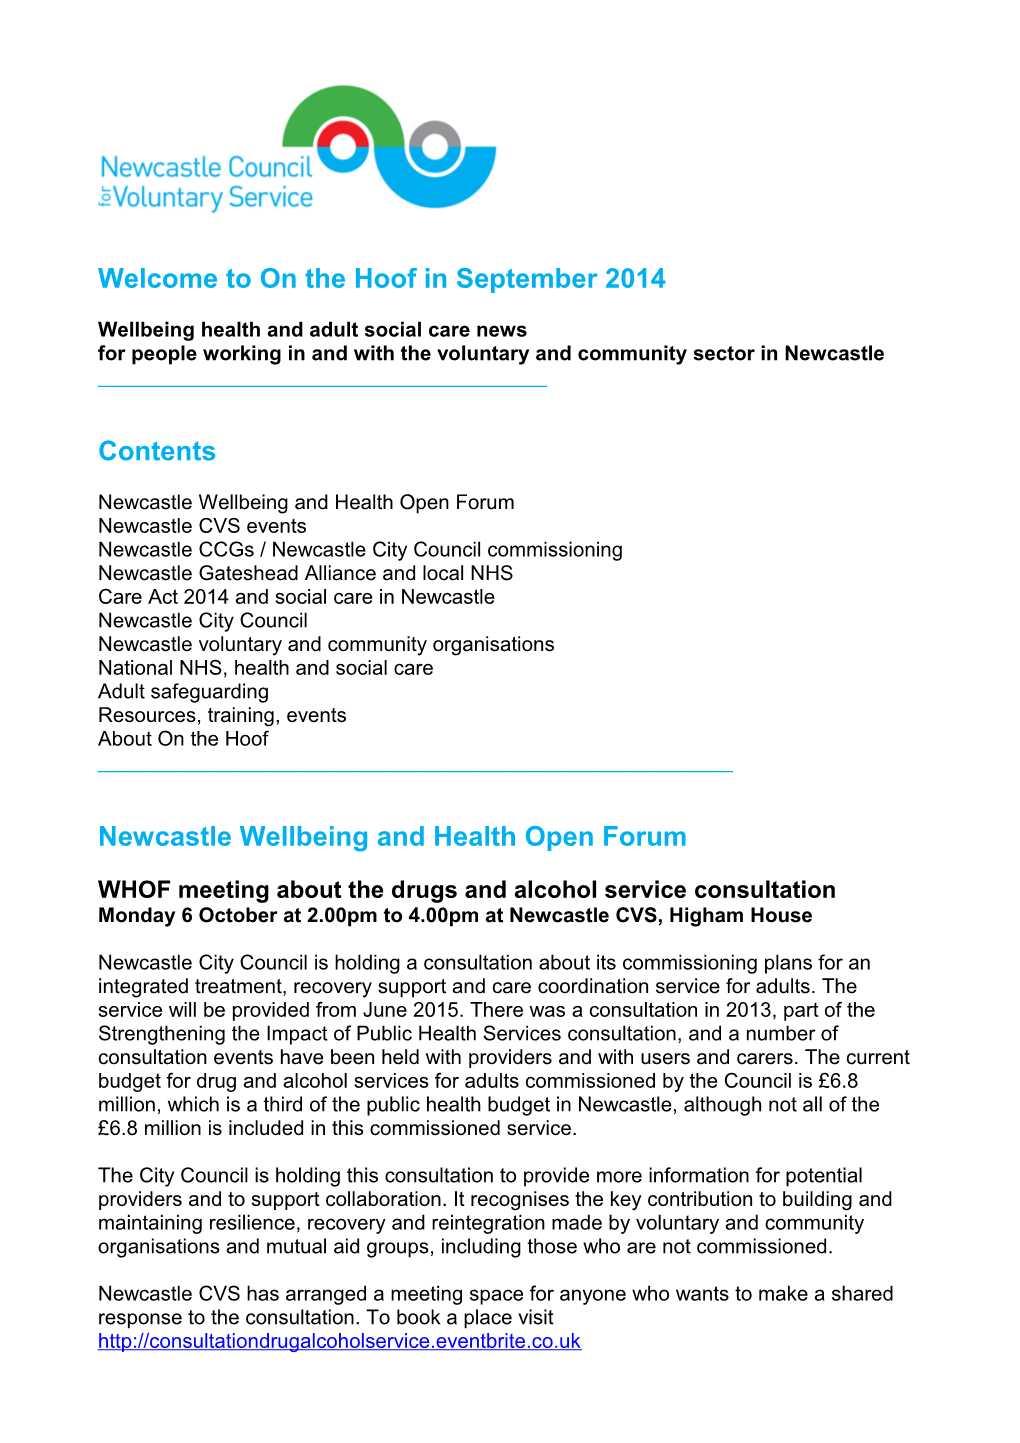 Wellbeing Health and Adult Social Care News s1